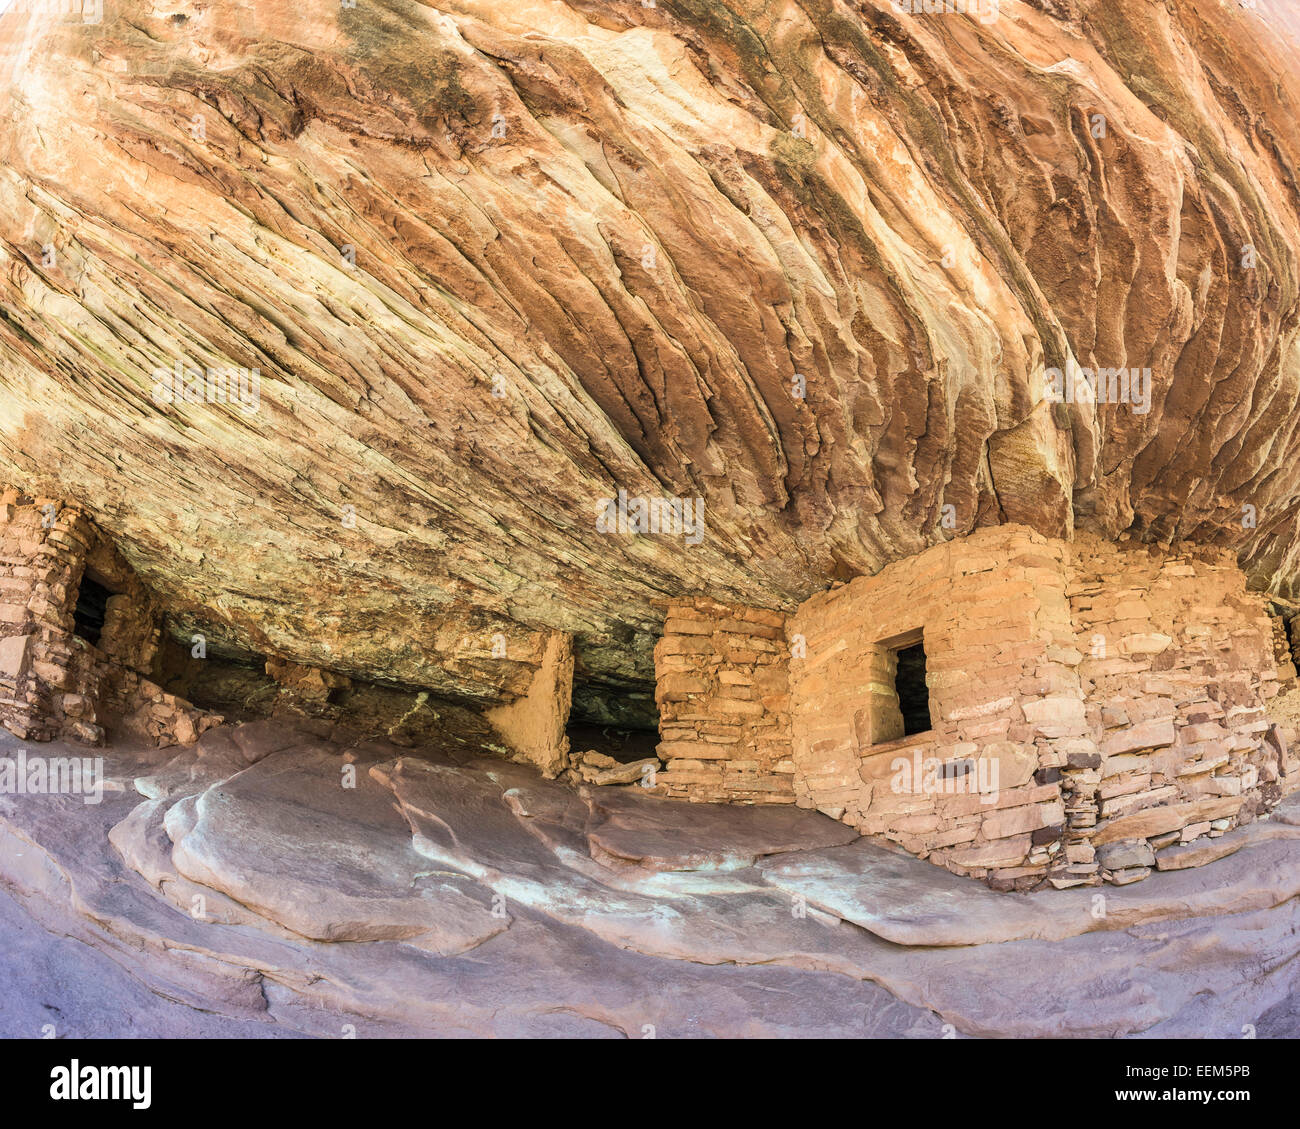 House on Fire, former grain storage under a rock overhang, Mule Canyon, Utah, United States Stock Photo